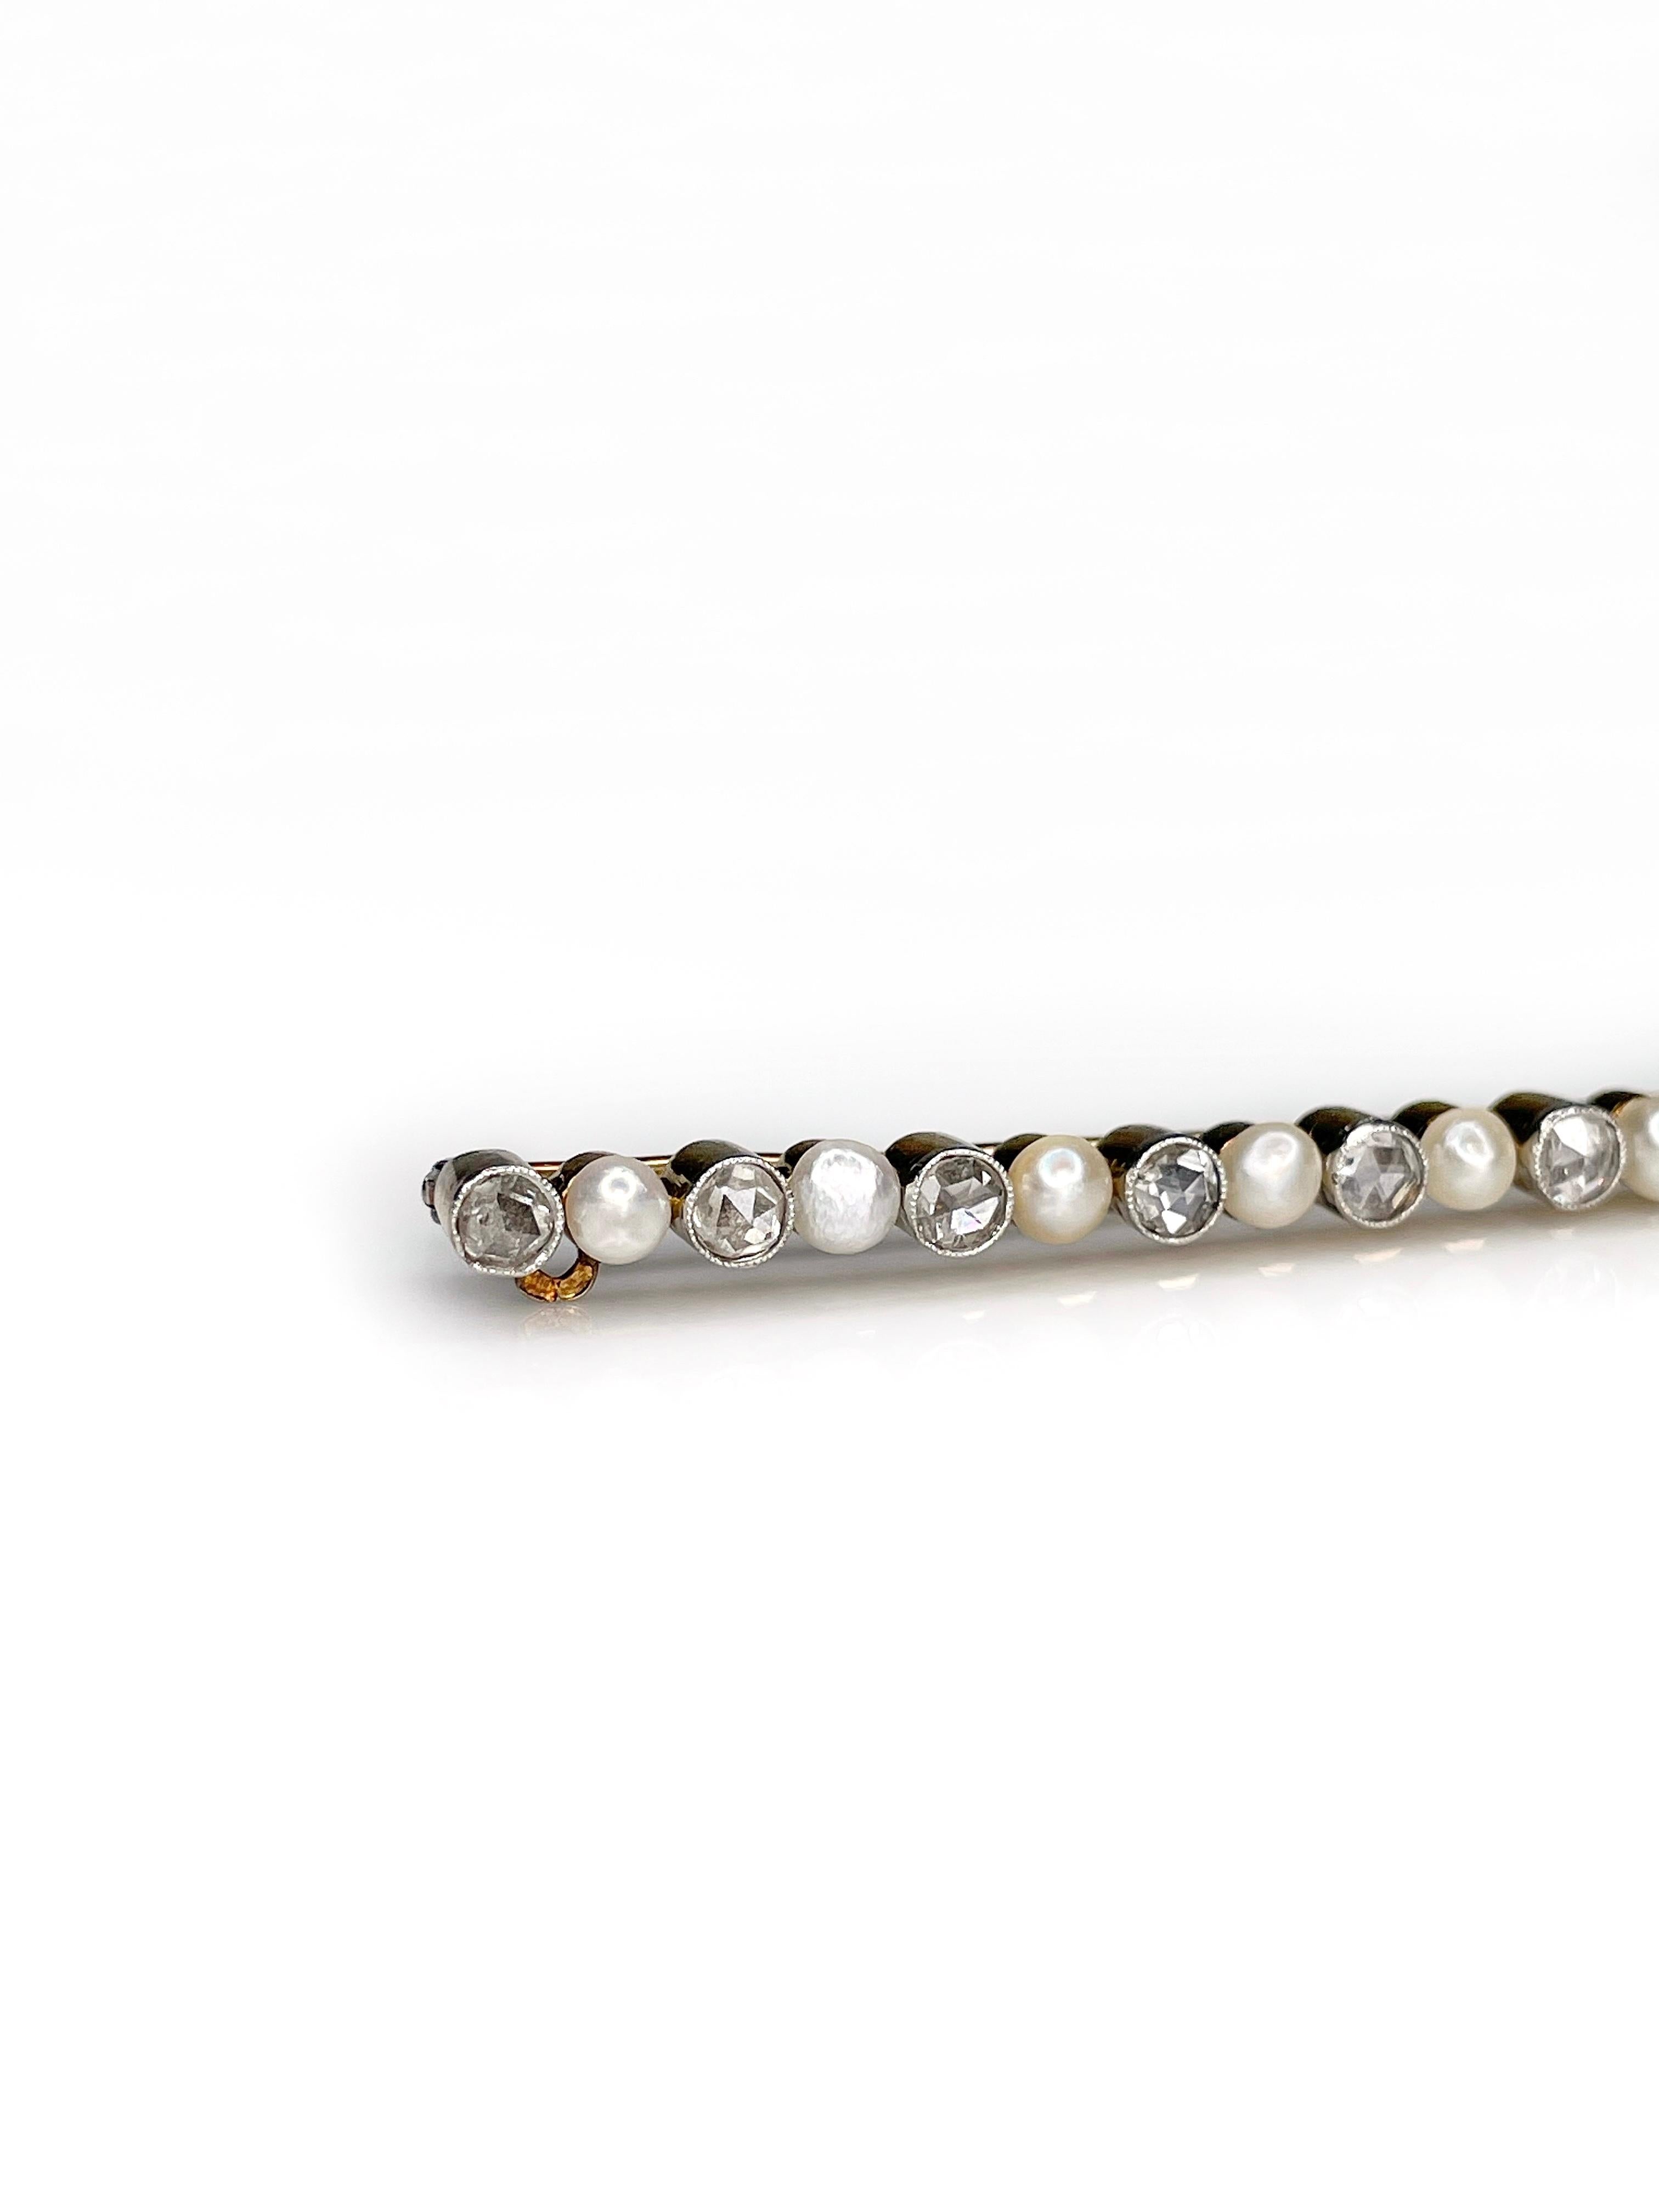 This brooch dating from Victorian period is crafted in 18K yellow gold. It features 11 rose cut diamonds, which in total weight 0.50ct. The gems are accompanied with 10 cultured pearls. 

Diamonds and pearls are beautifully set in a pretty